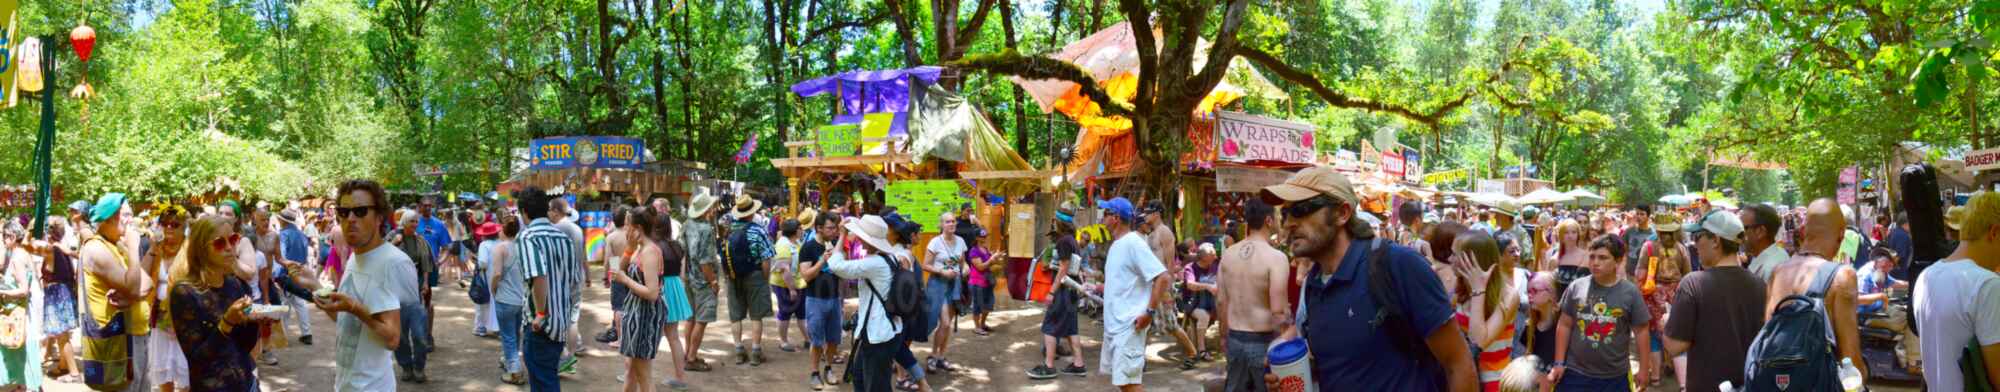 Crowd at Oregon Country Fair